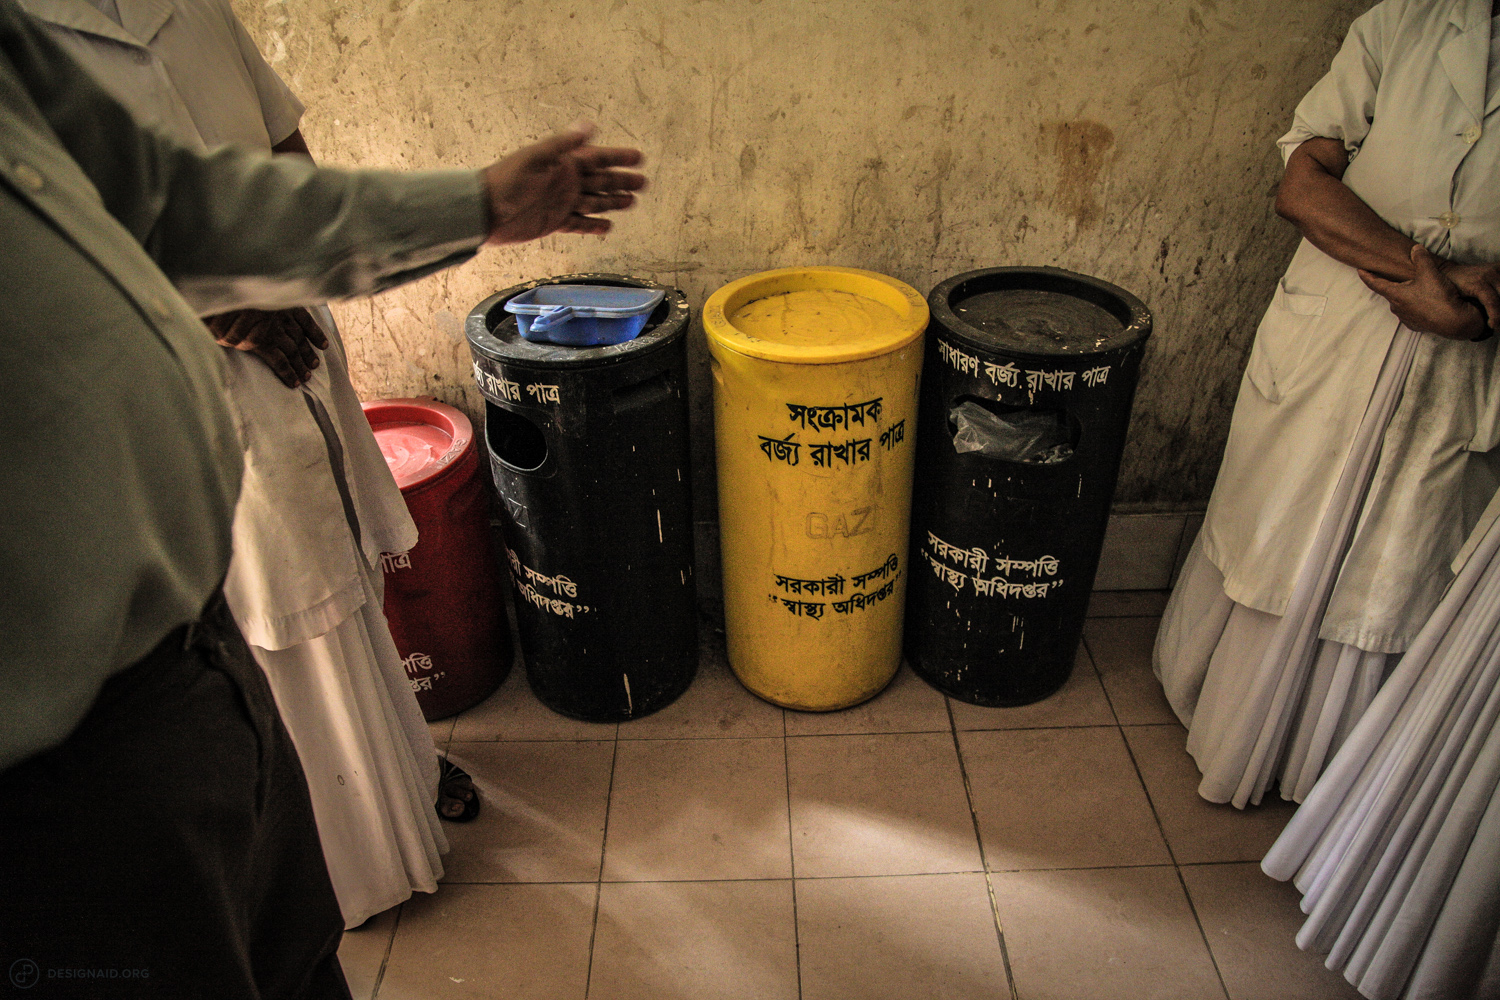  Labelled waste bins still end up with mixed waste, creating an infectious environment for waste treatment 